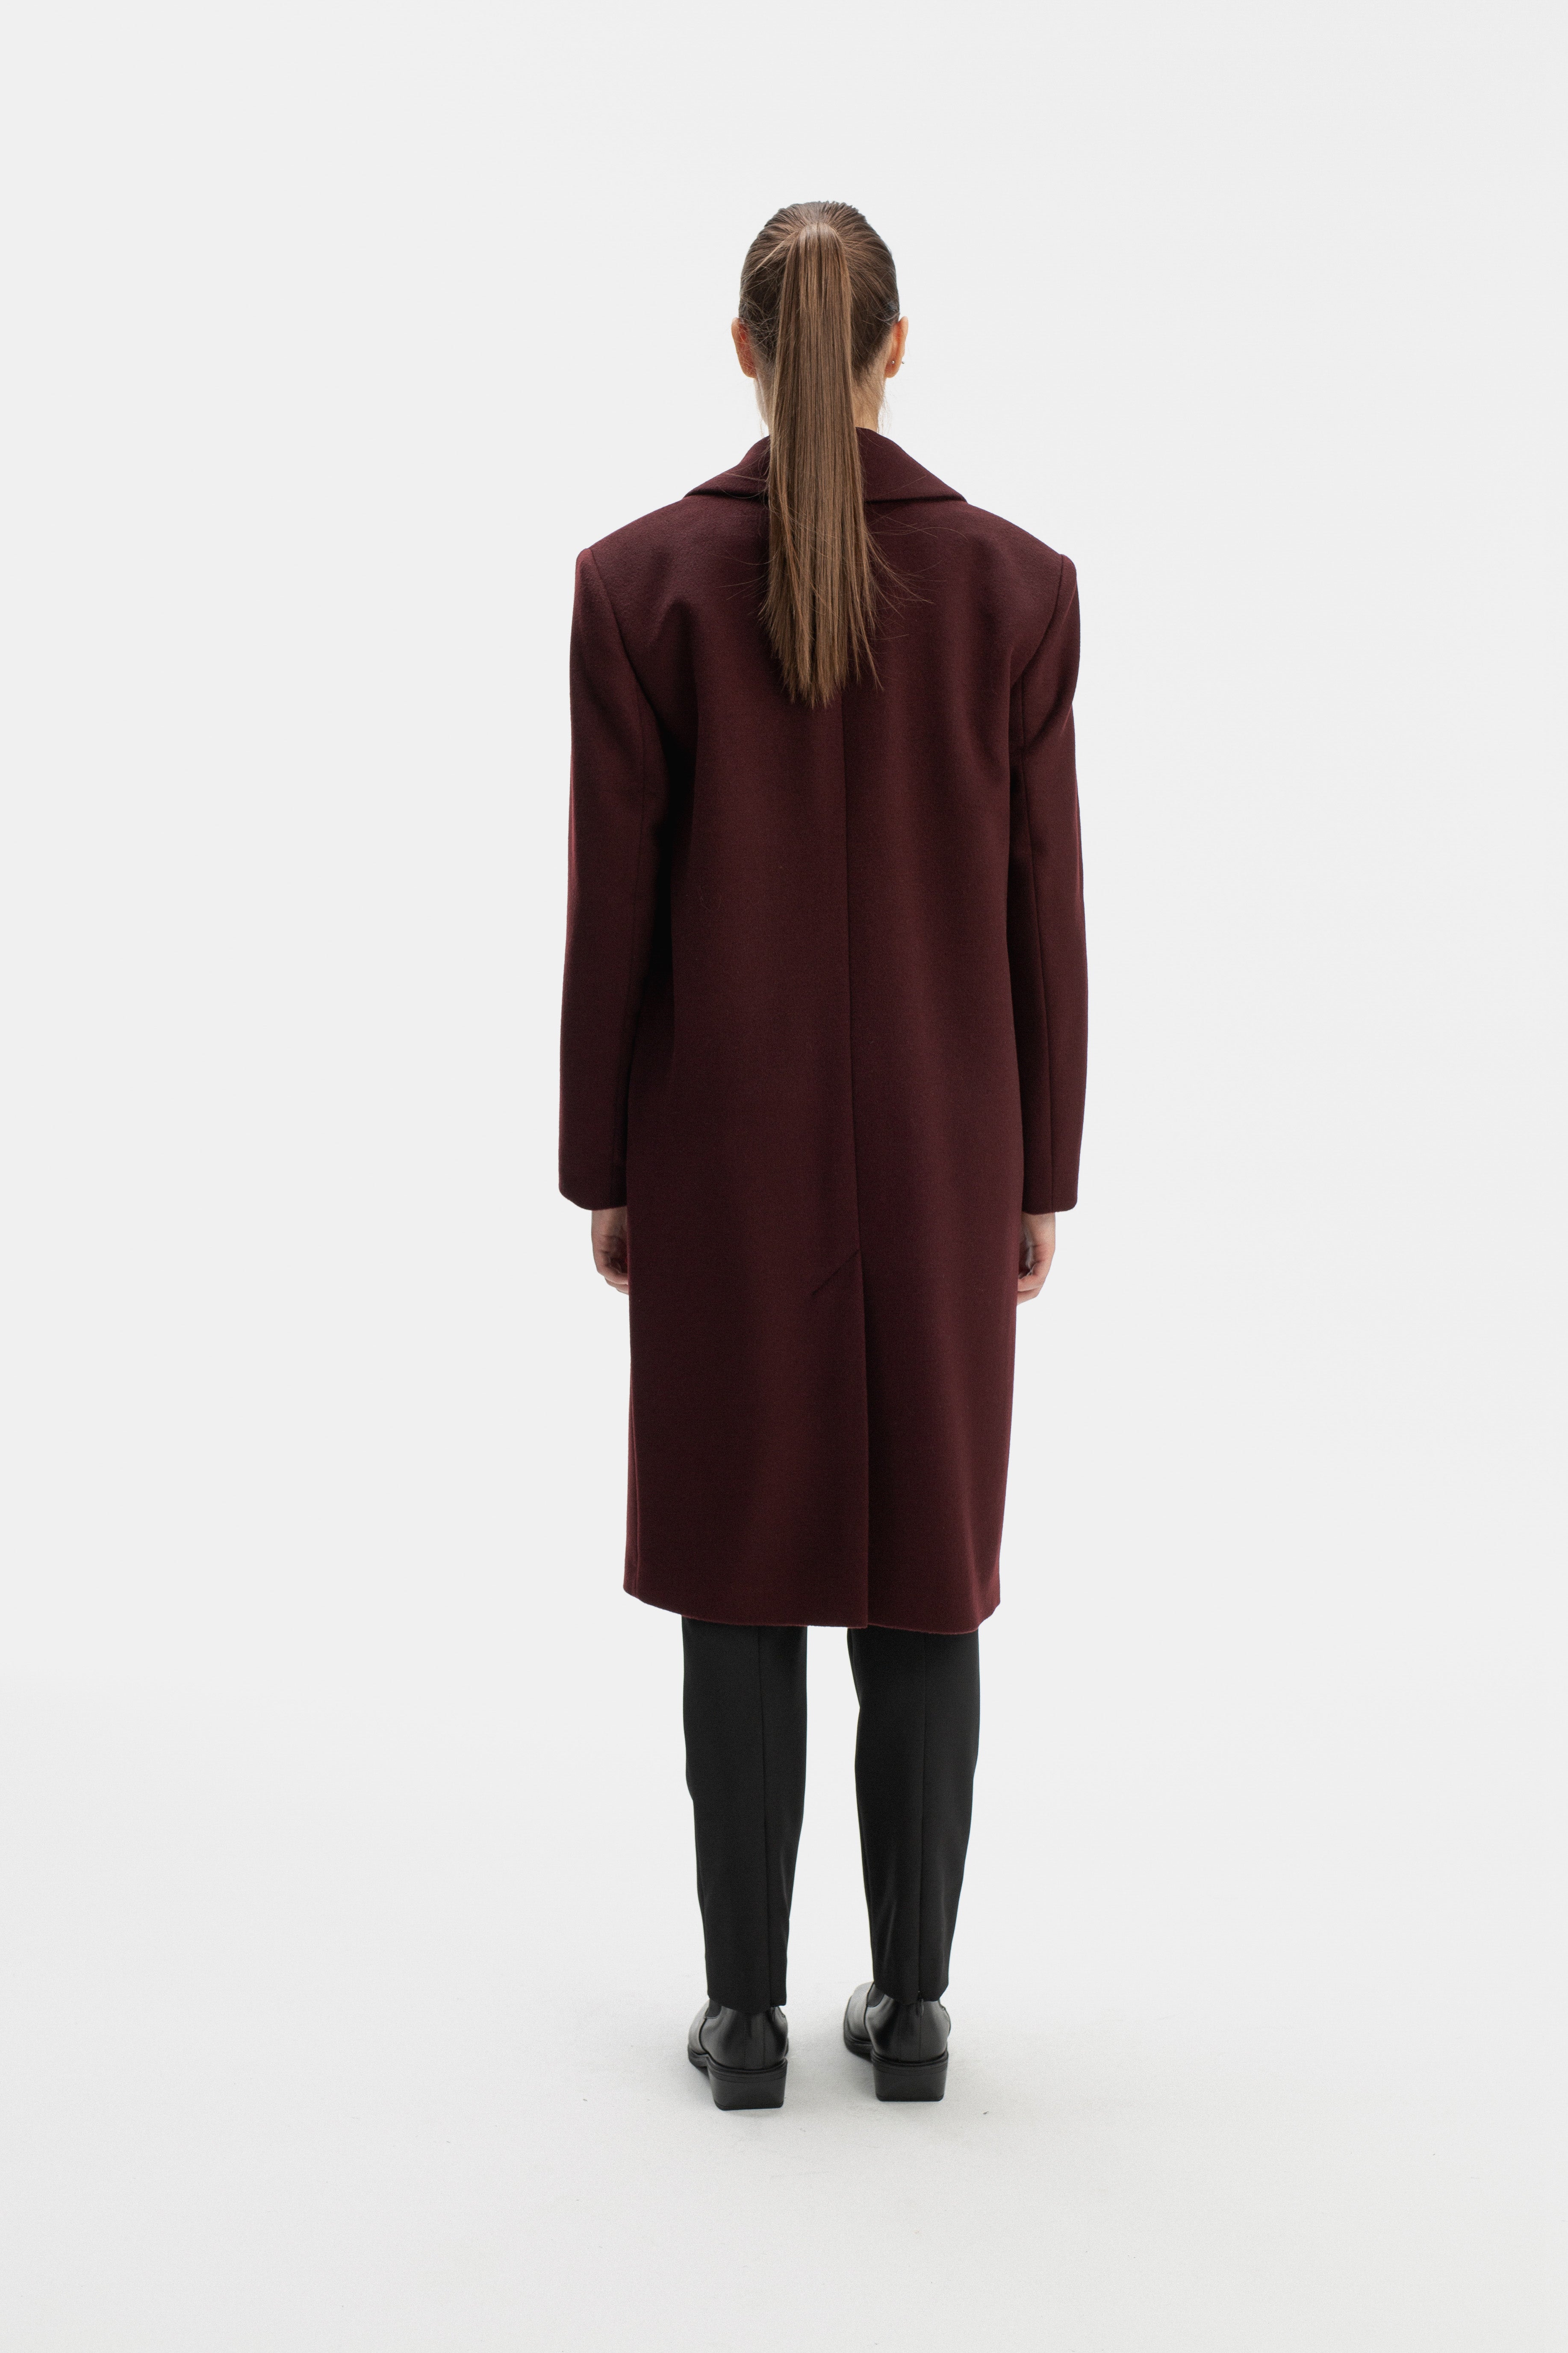 TAILORED BURGUNDY COAT WITH BROAD SHOULDERS